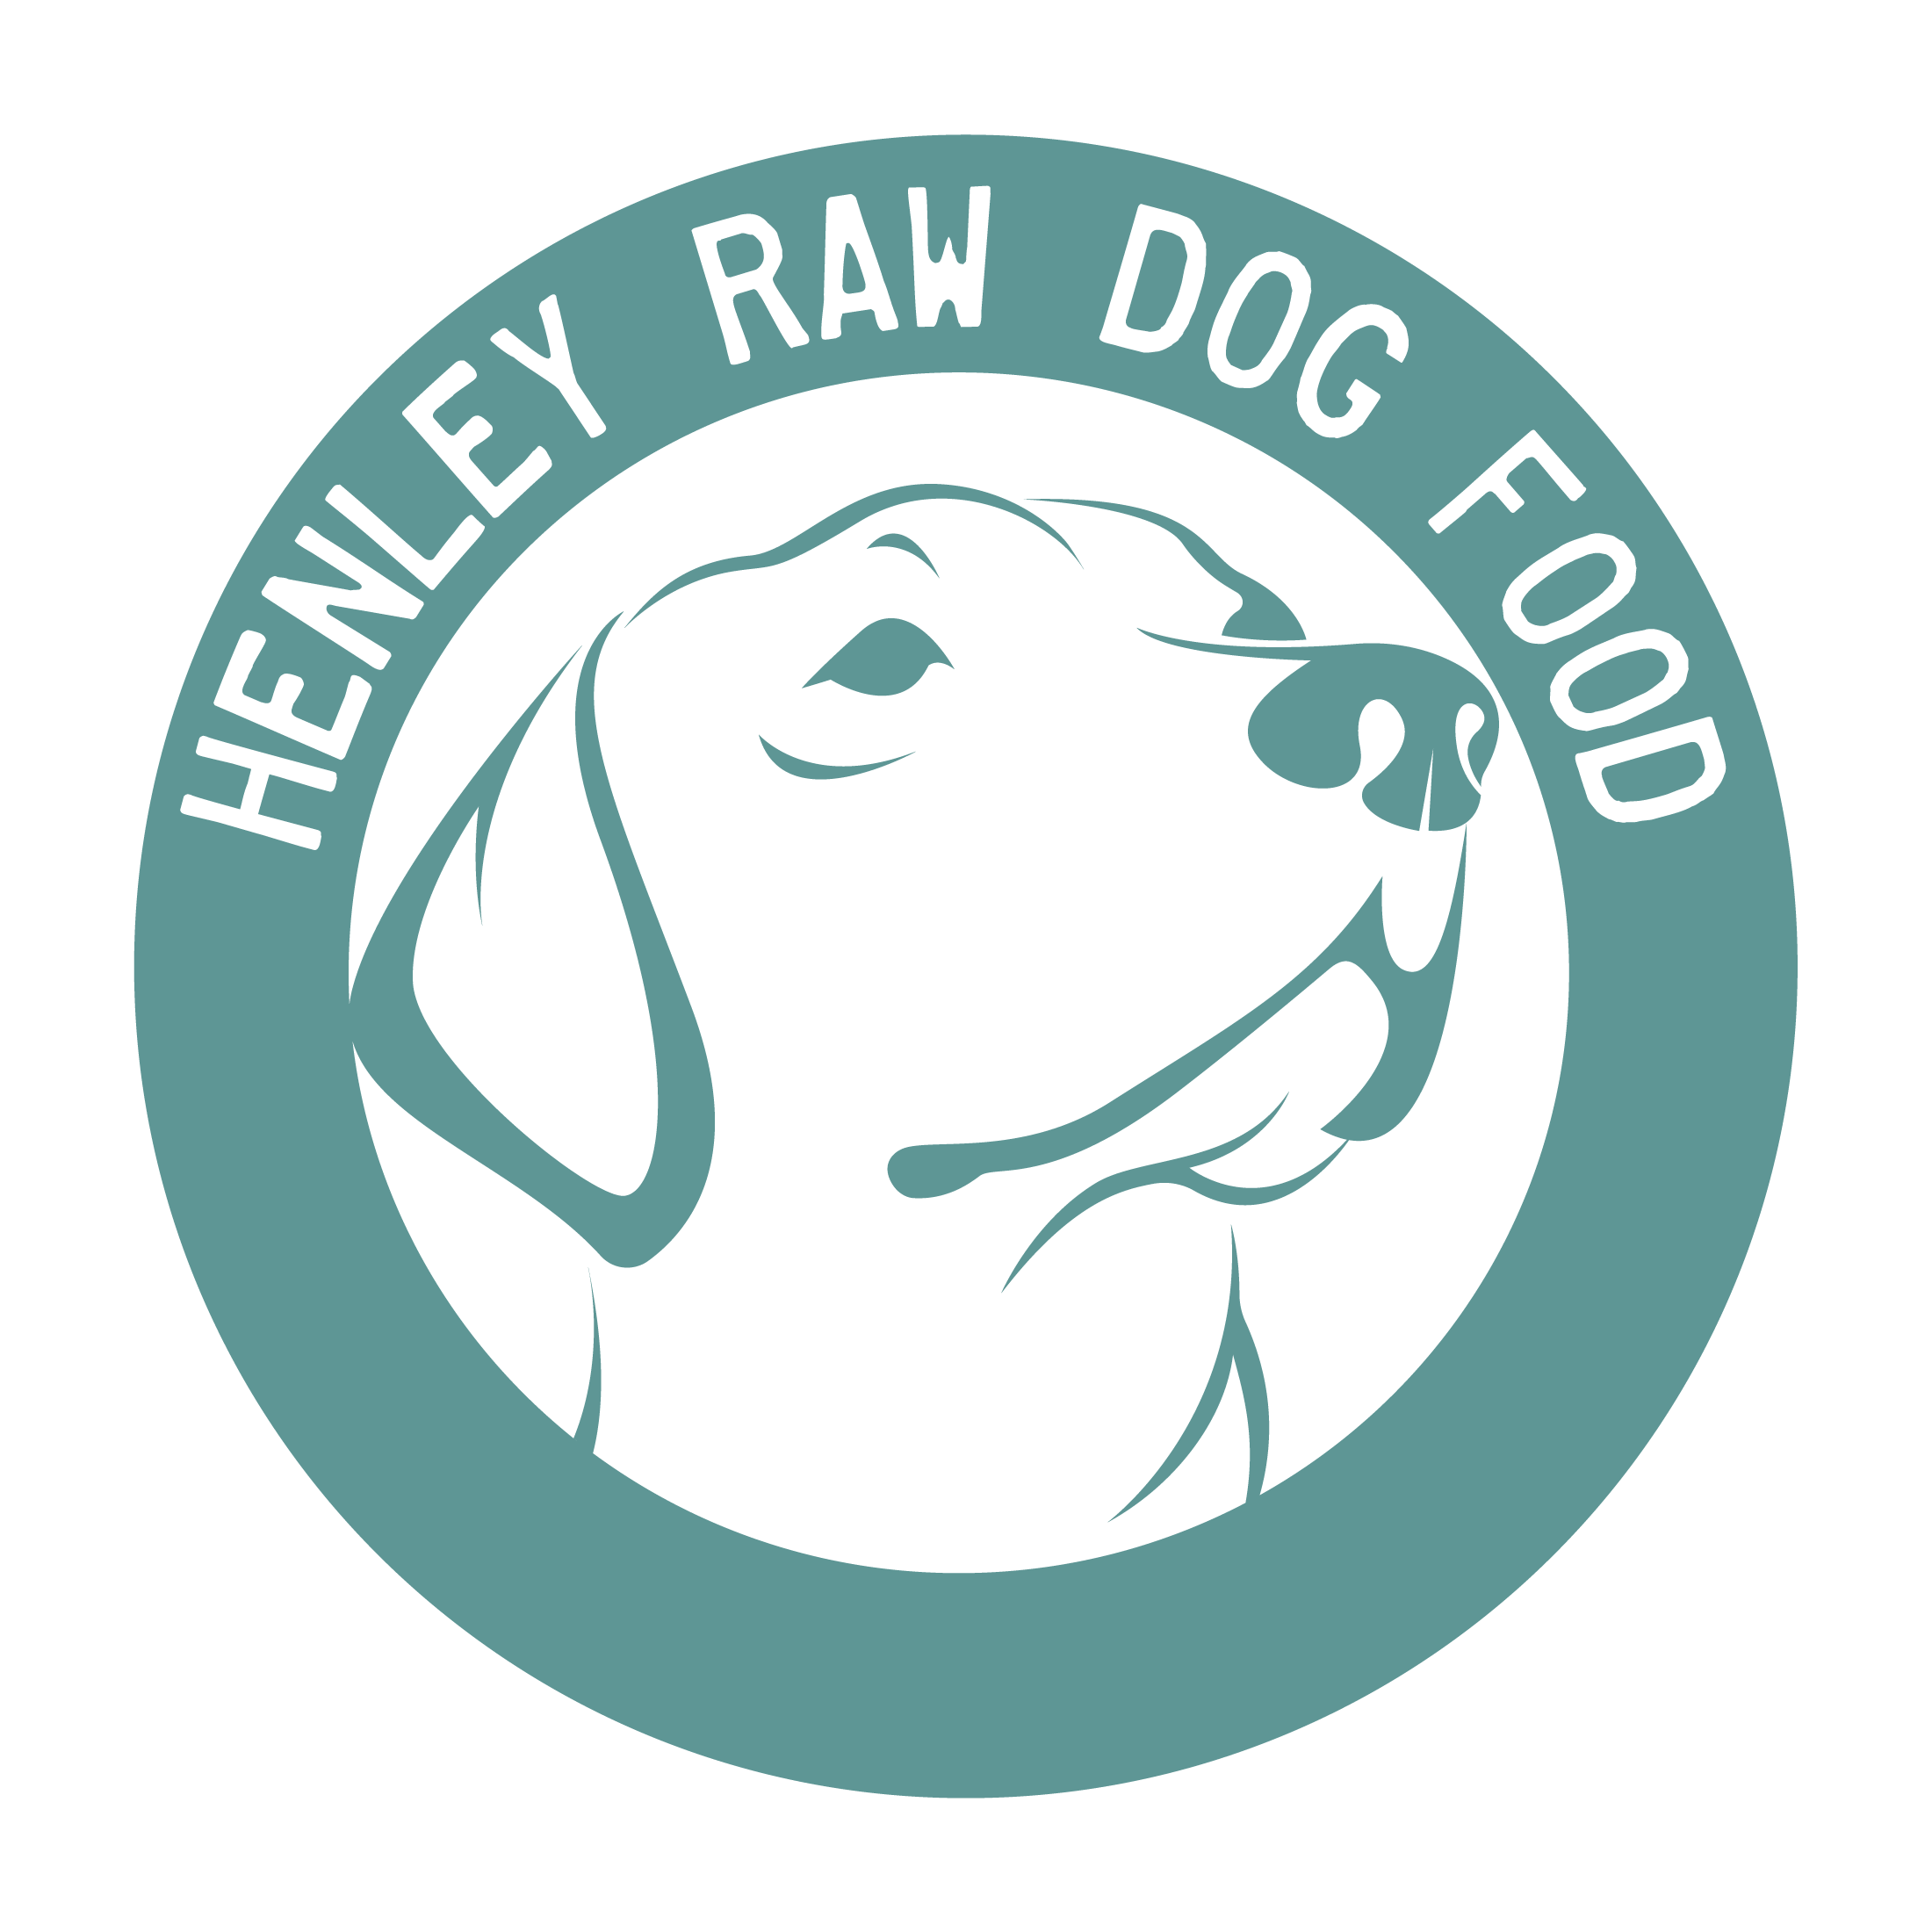 Logo of Henley Raw Dog Food Pet Foods And Animal Feeds In Reading, Berkshire